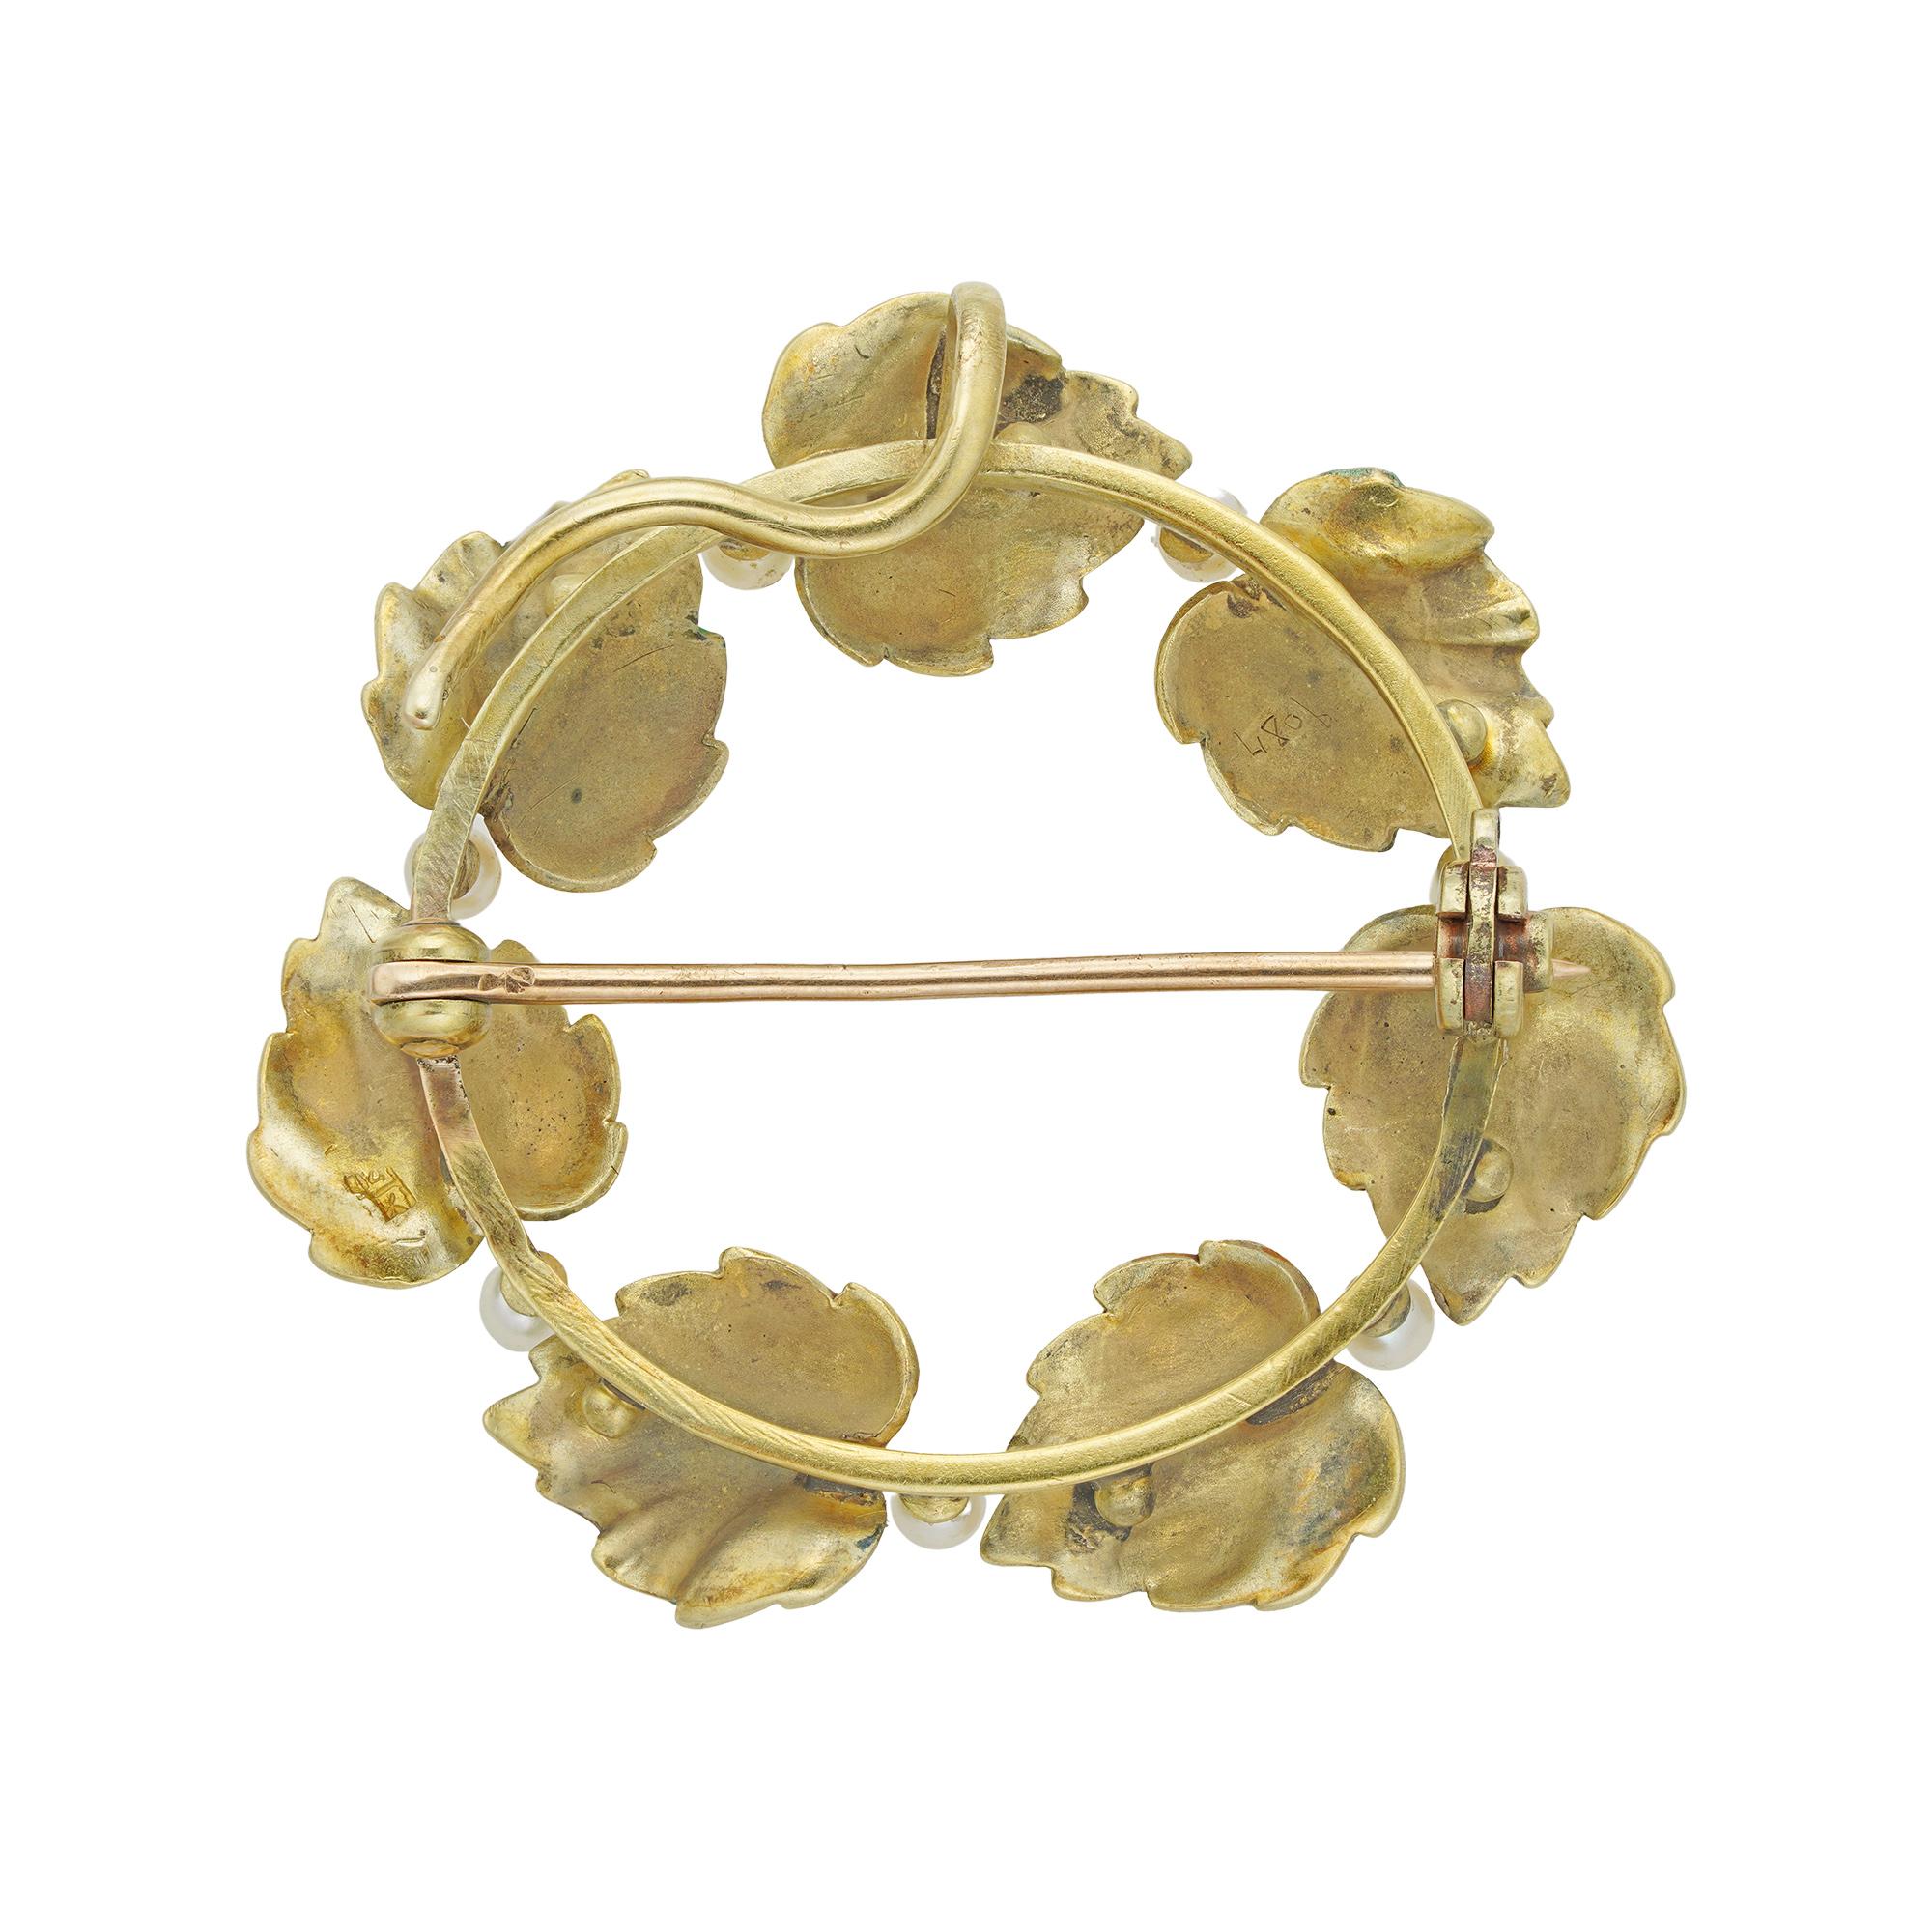 An Art Nouveau enamel wreath brooch, consisting of seven enamelled mulberry tree leaves, with seed pearls set in-between, all mounted in yellow gold, tested as 18ct gold with 14ct gold pin, circa 1900, probably American, measuring approximately